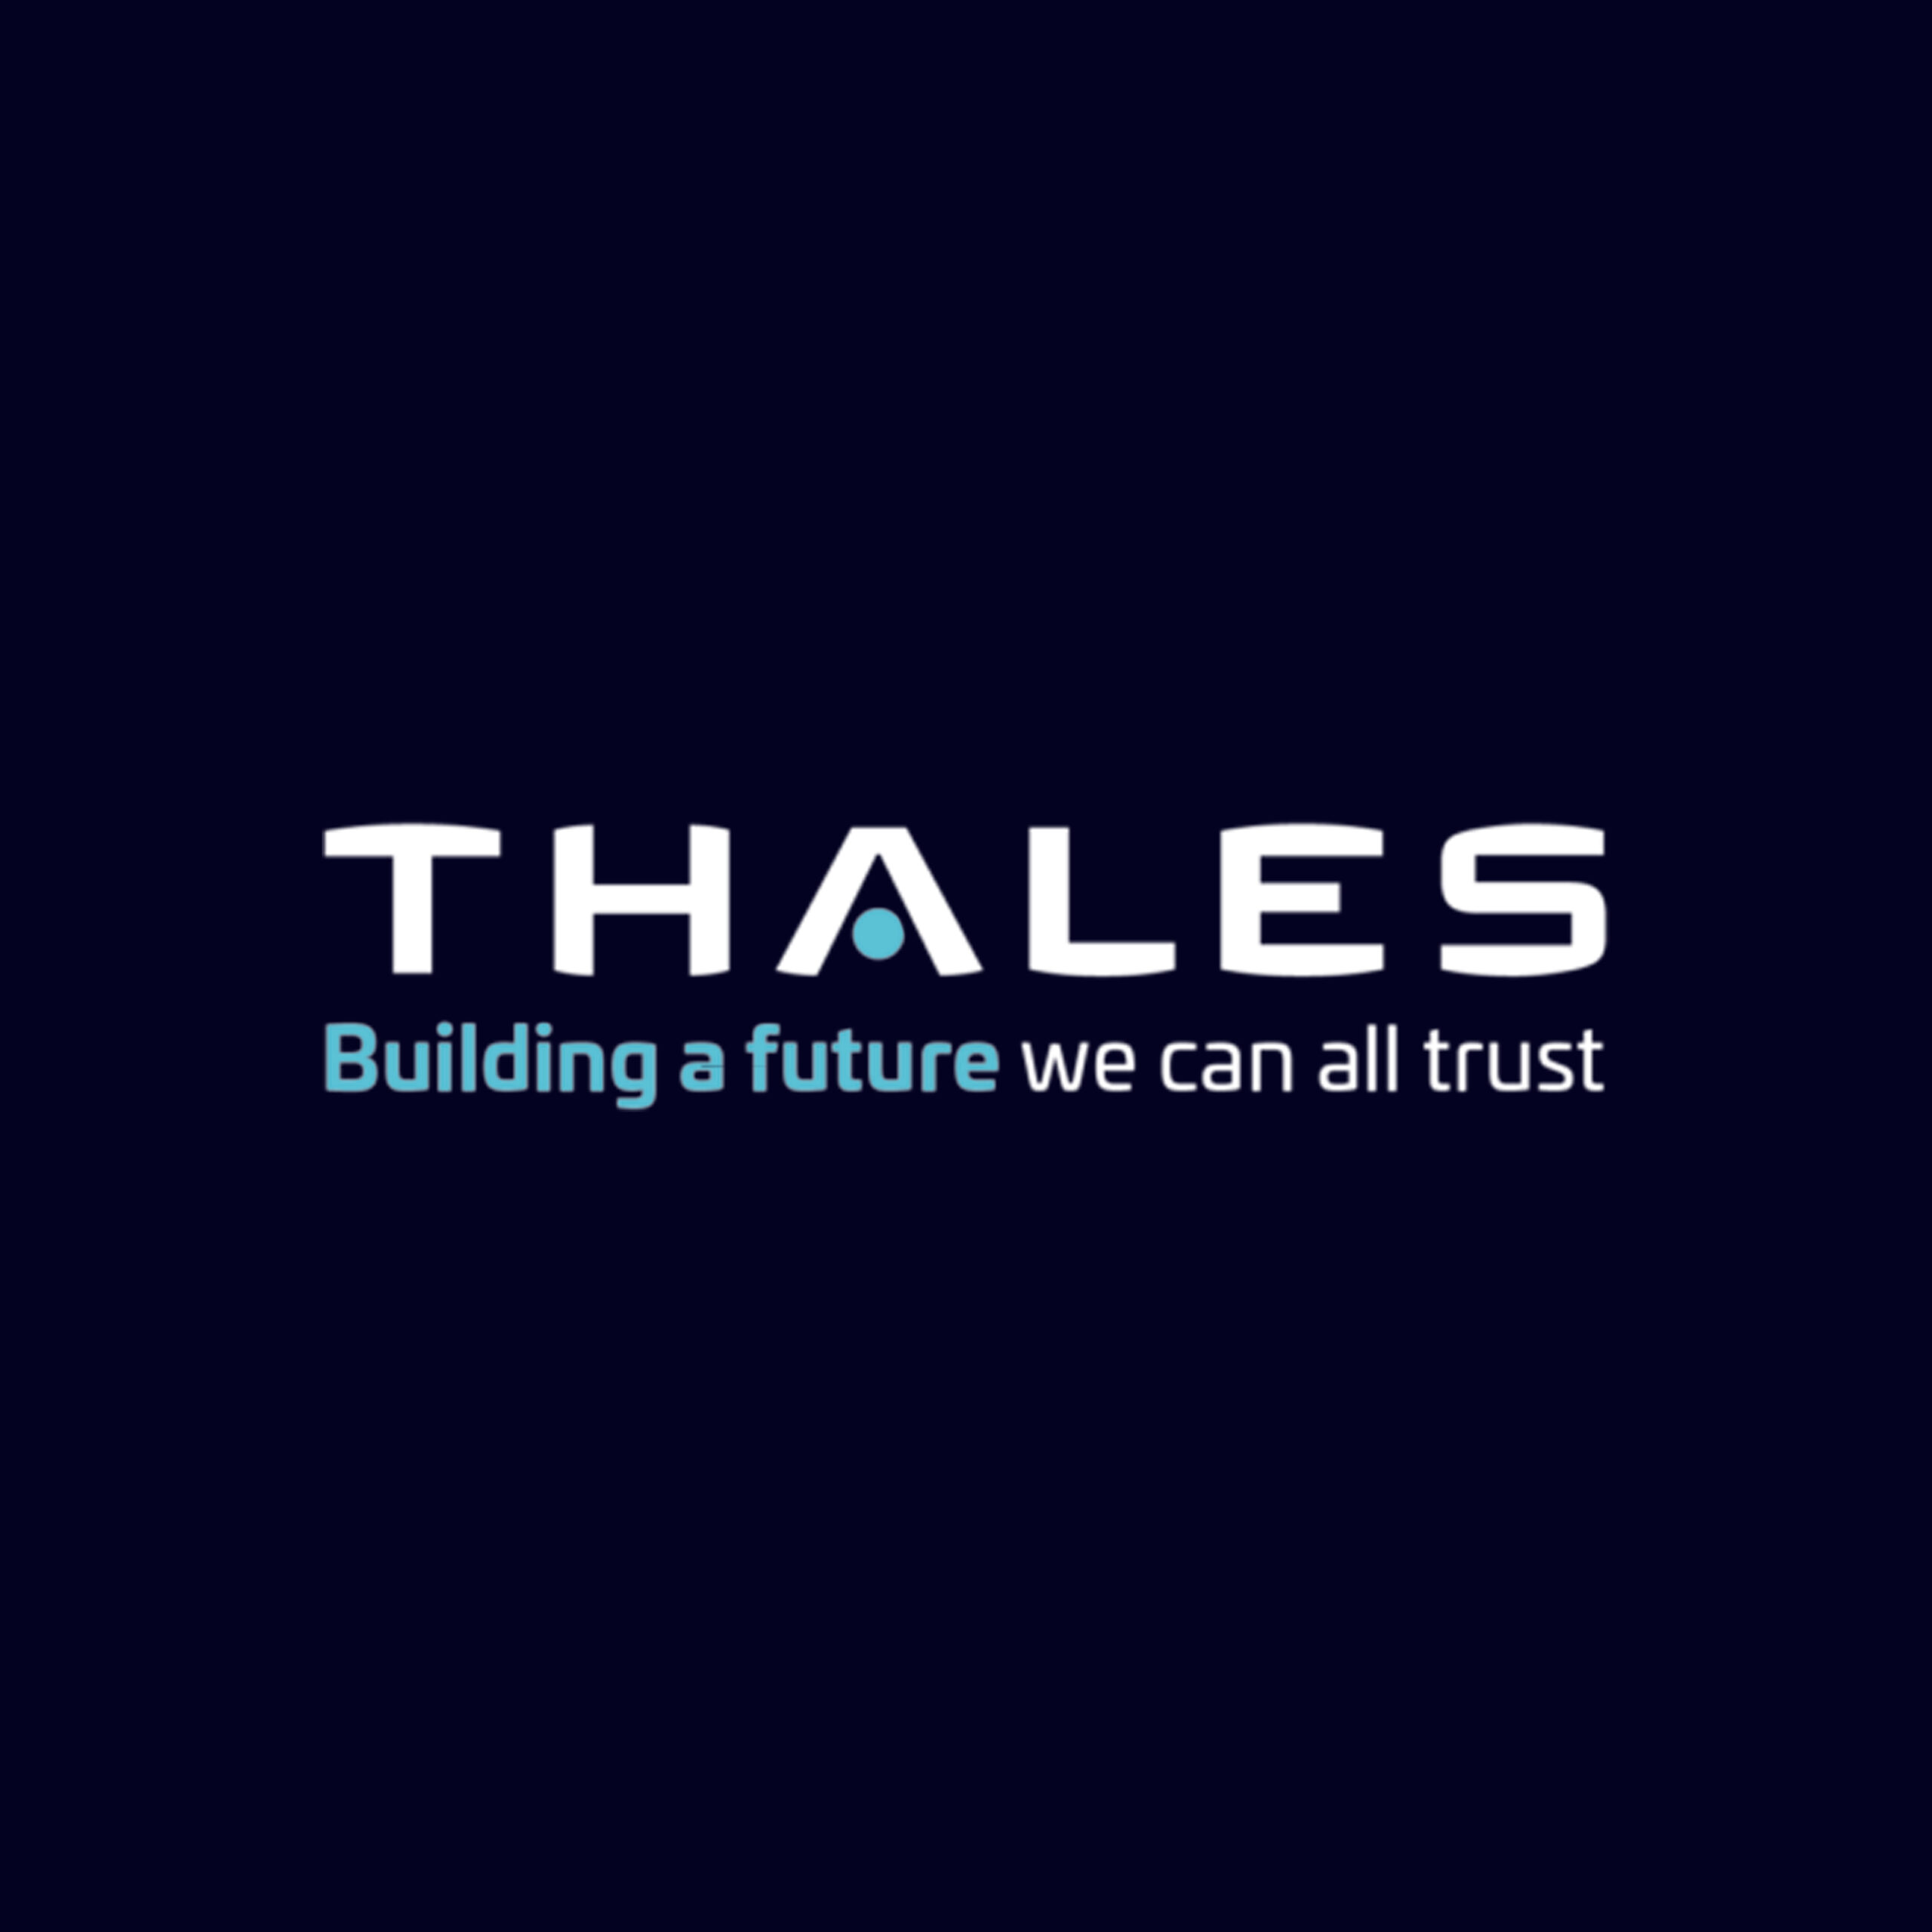 Thales - Building a future we can all trust